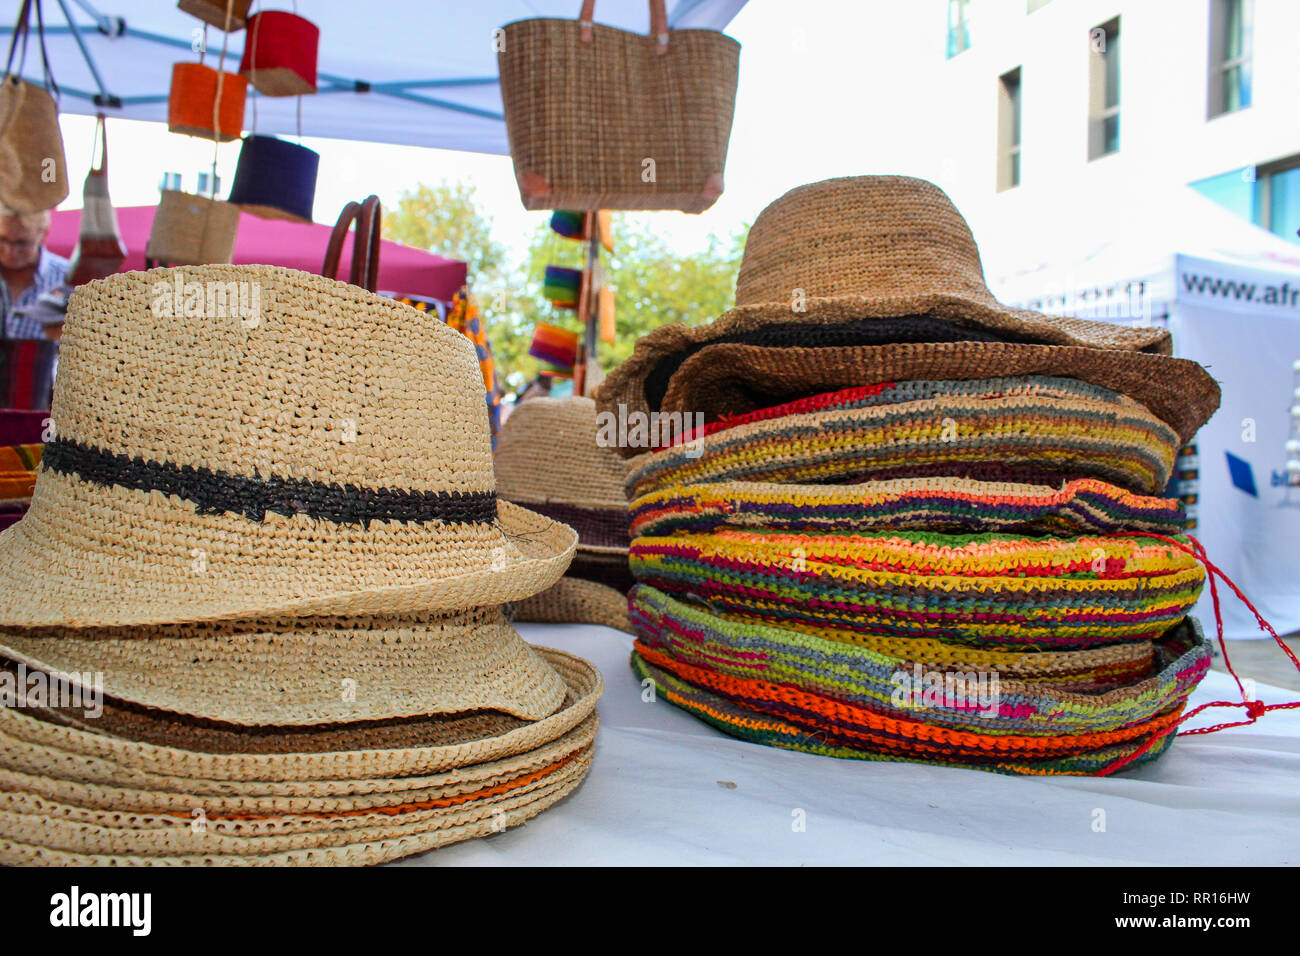 Colorful straw hats and bags at a Market for sale Stock Photo - Alamy